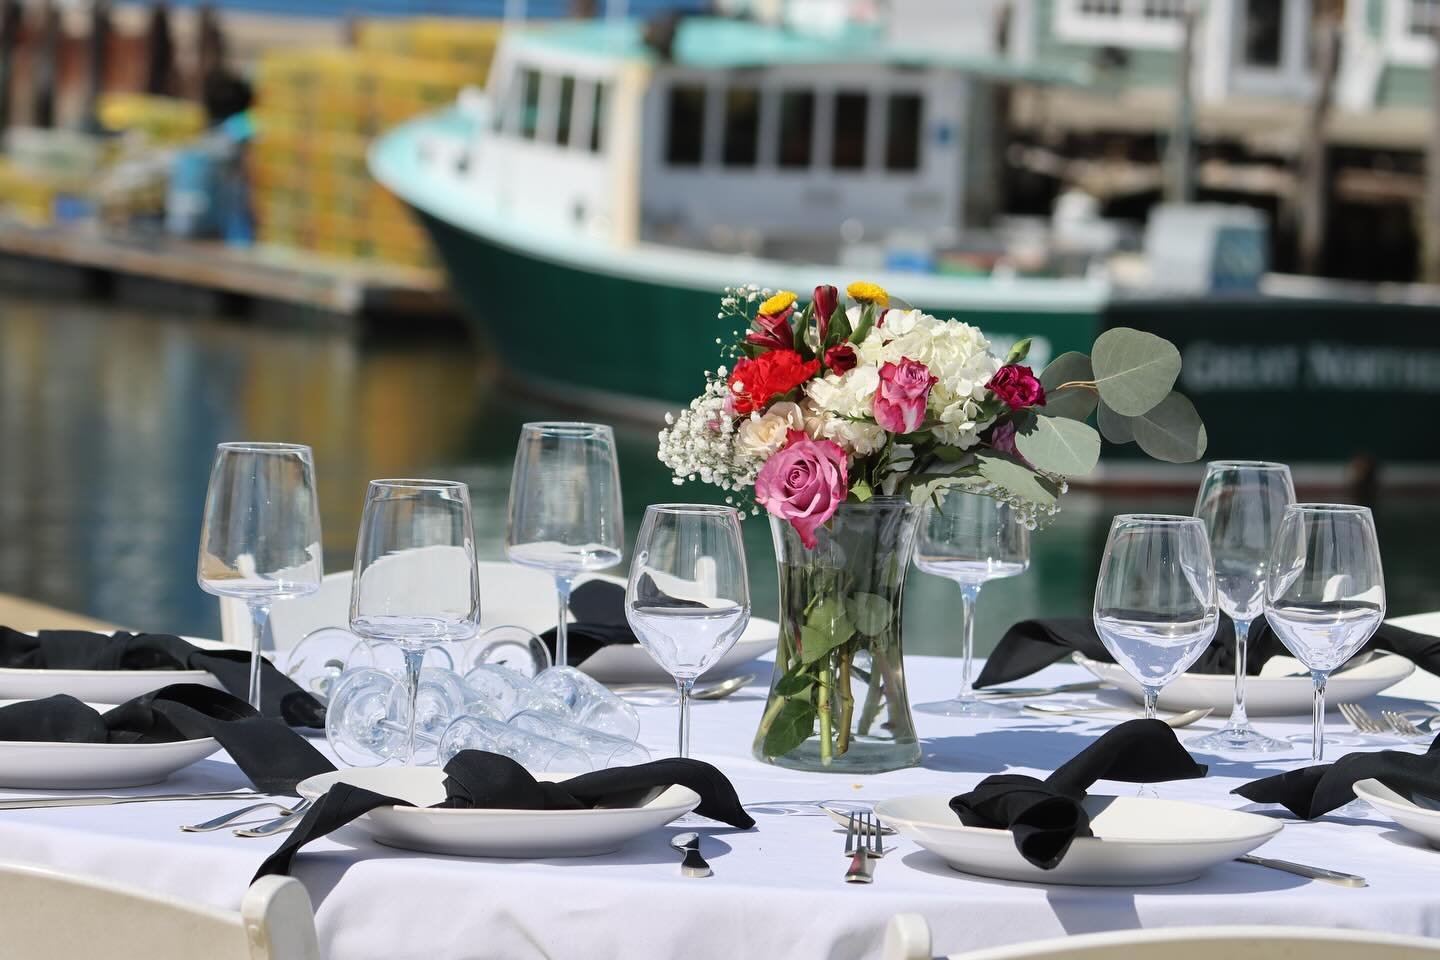 Sit back &amp; relax, we&rsquo;ve got the details covered 🥂✨💐

Since 2003, our catering company has specialized in curating unique events. From small gatherings to large occasions, let&rsquo;s work together to create unforgettable memories.

#maine